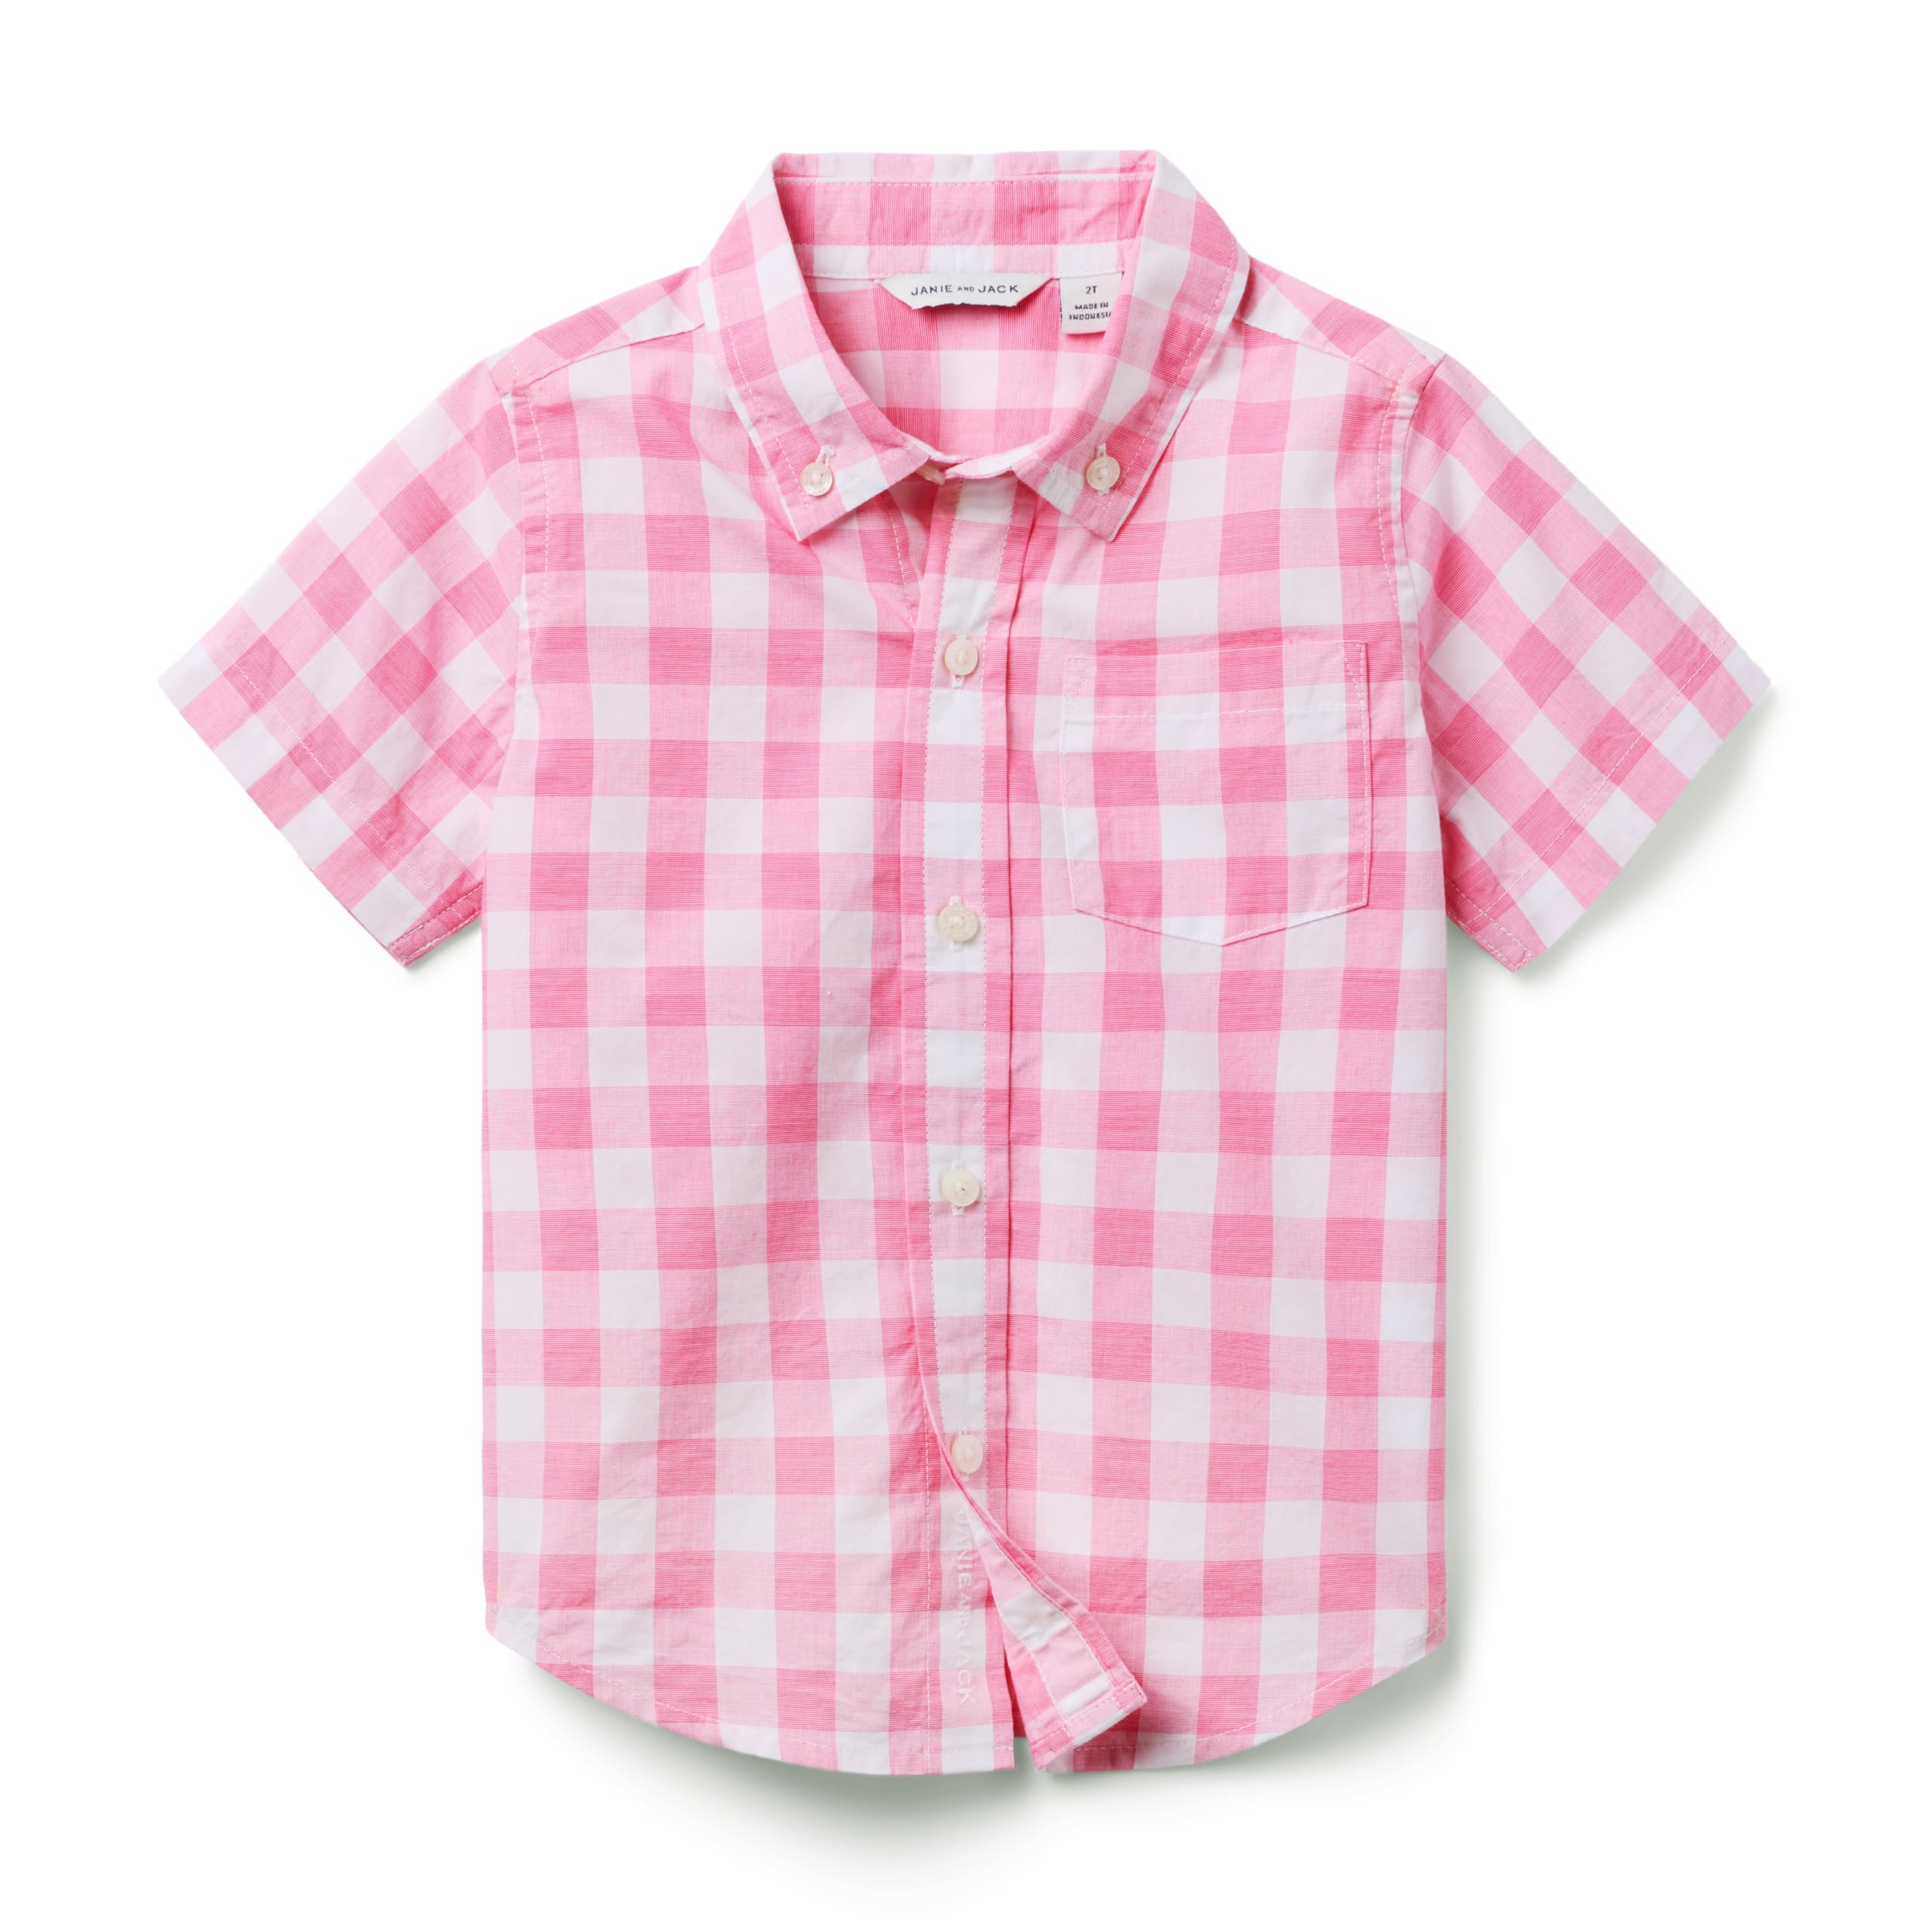 Boys Gingham Top (Toddler/Little Kid/Big Kid) Janie and Jack